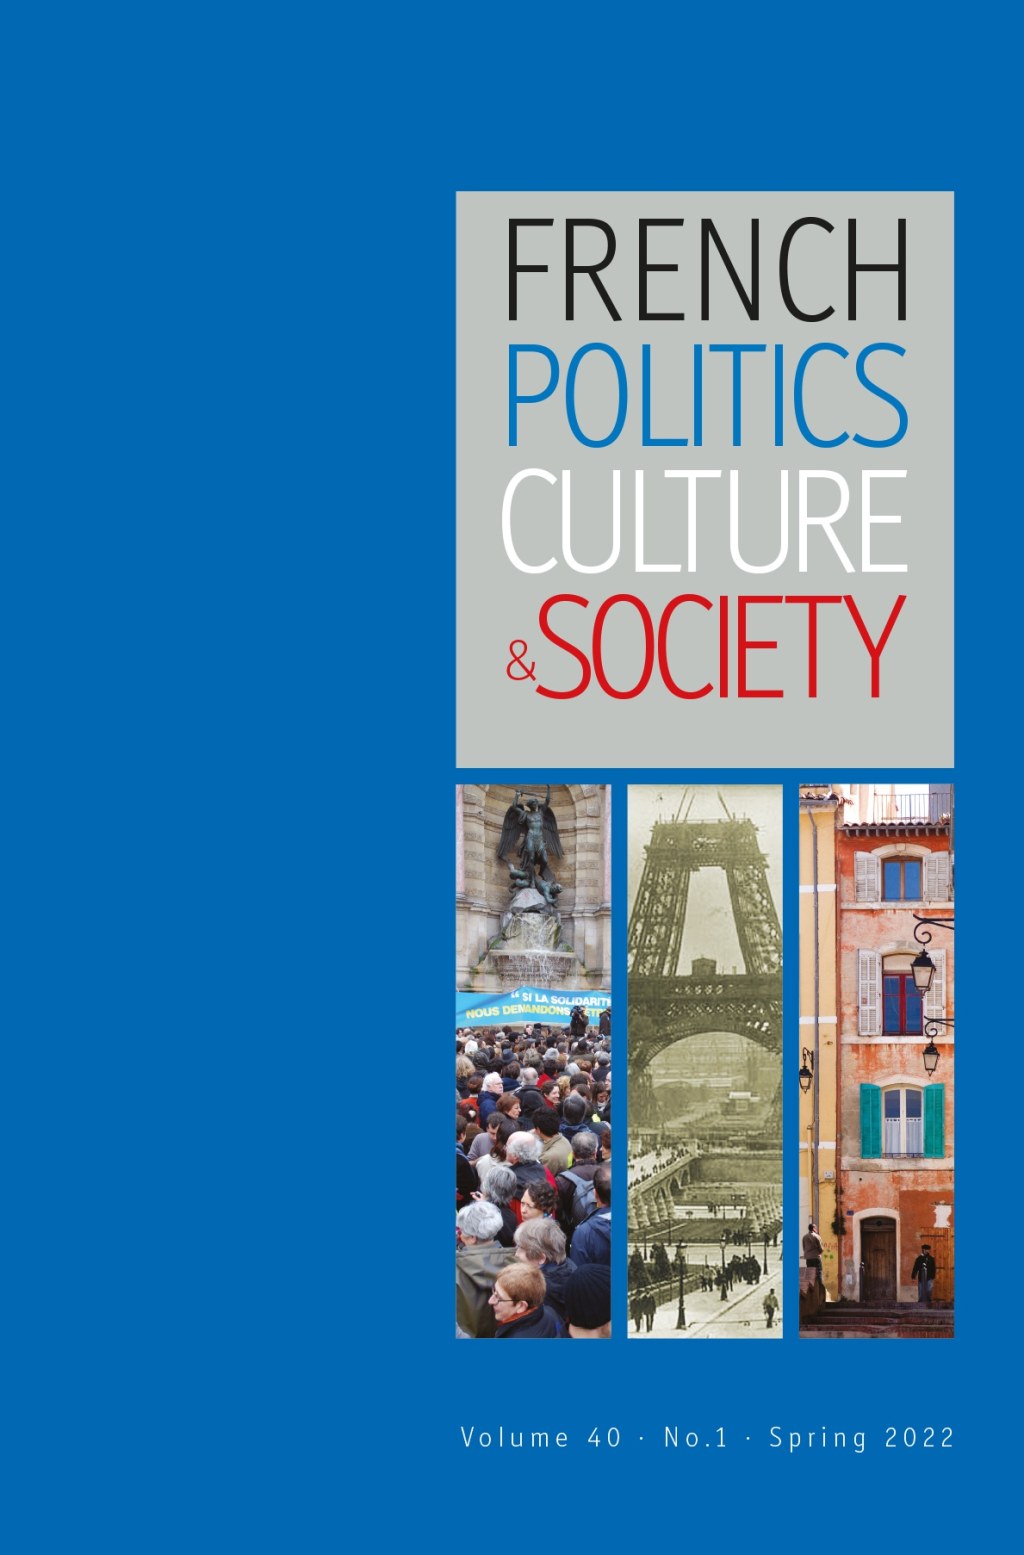 french politics book - Journal French Politics, Culture & Society /  Cairn